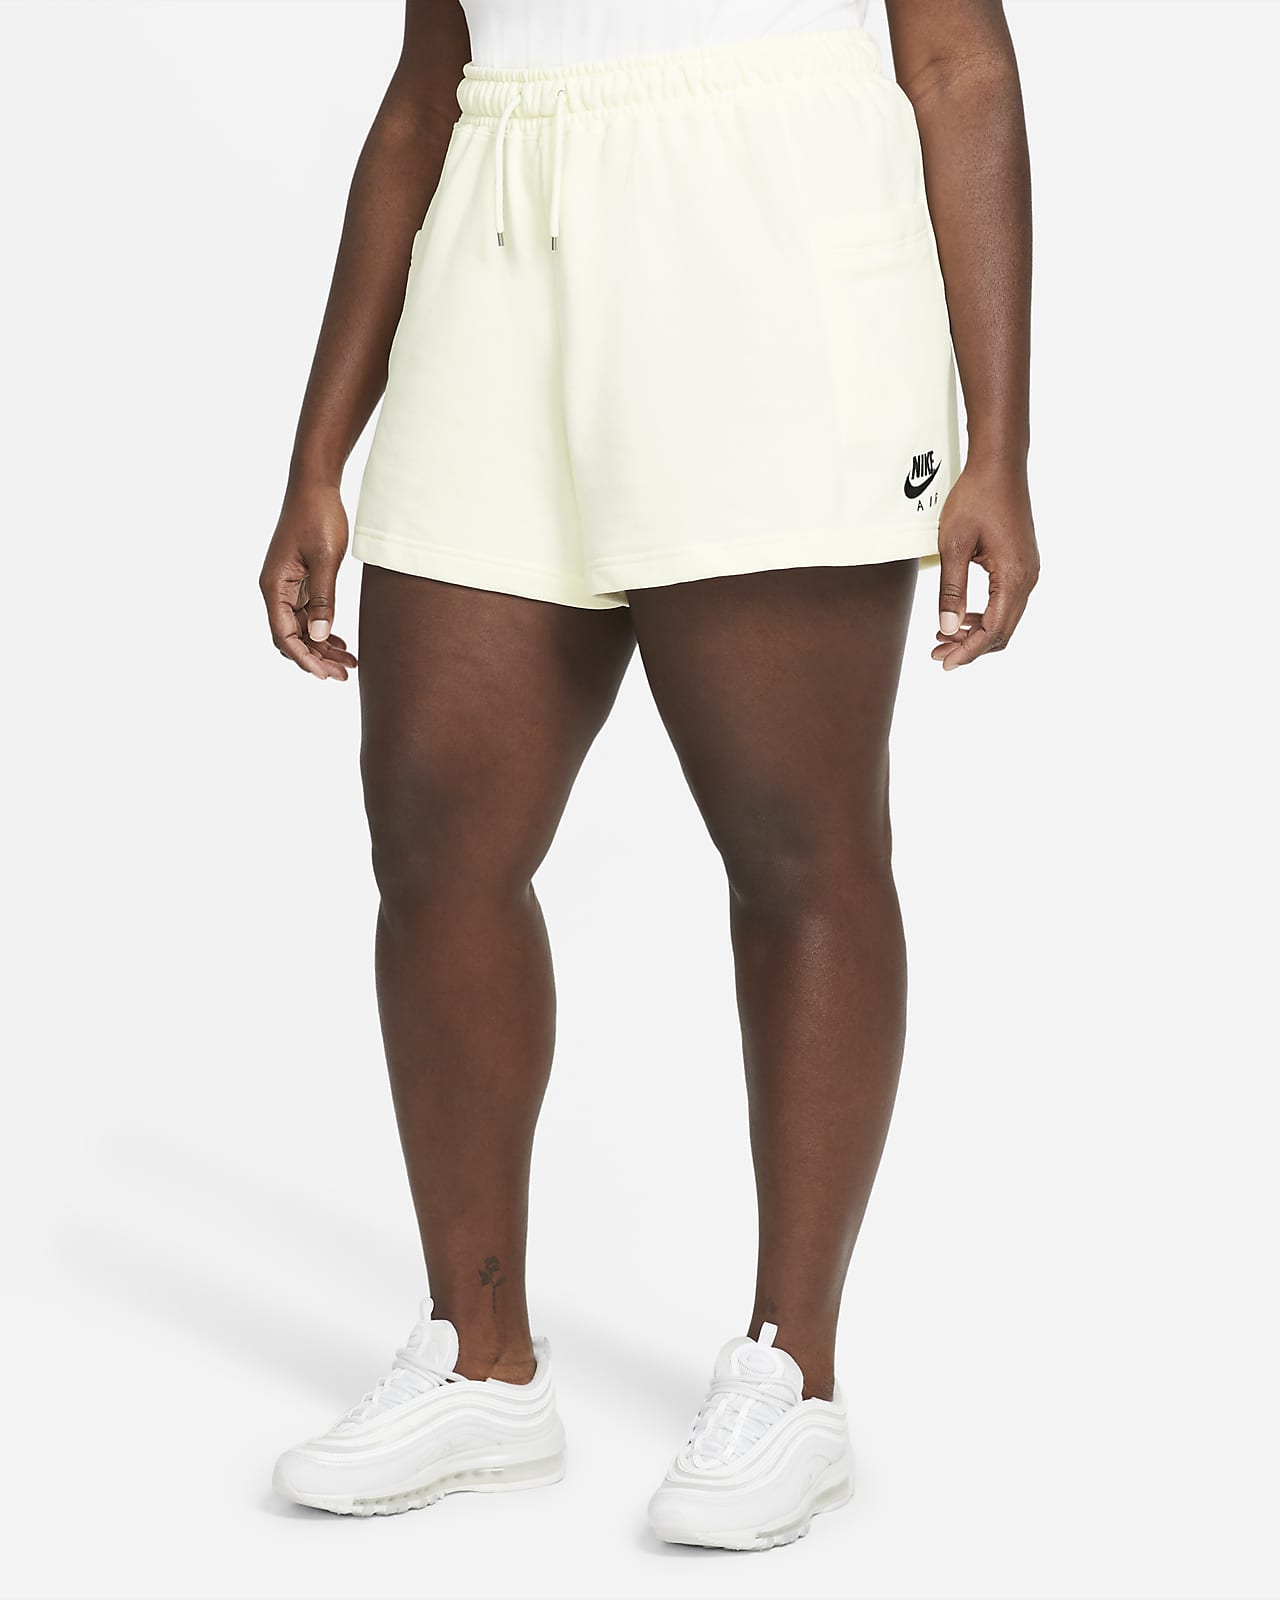 Buy > womens plus size nike shorts > in stock